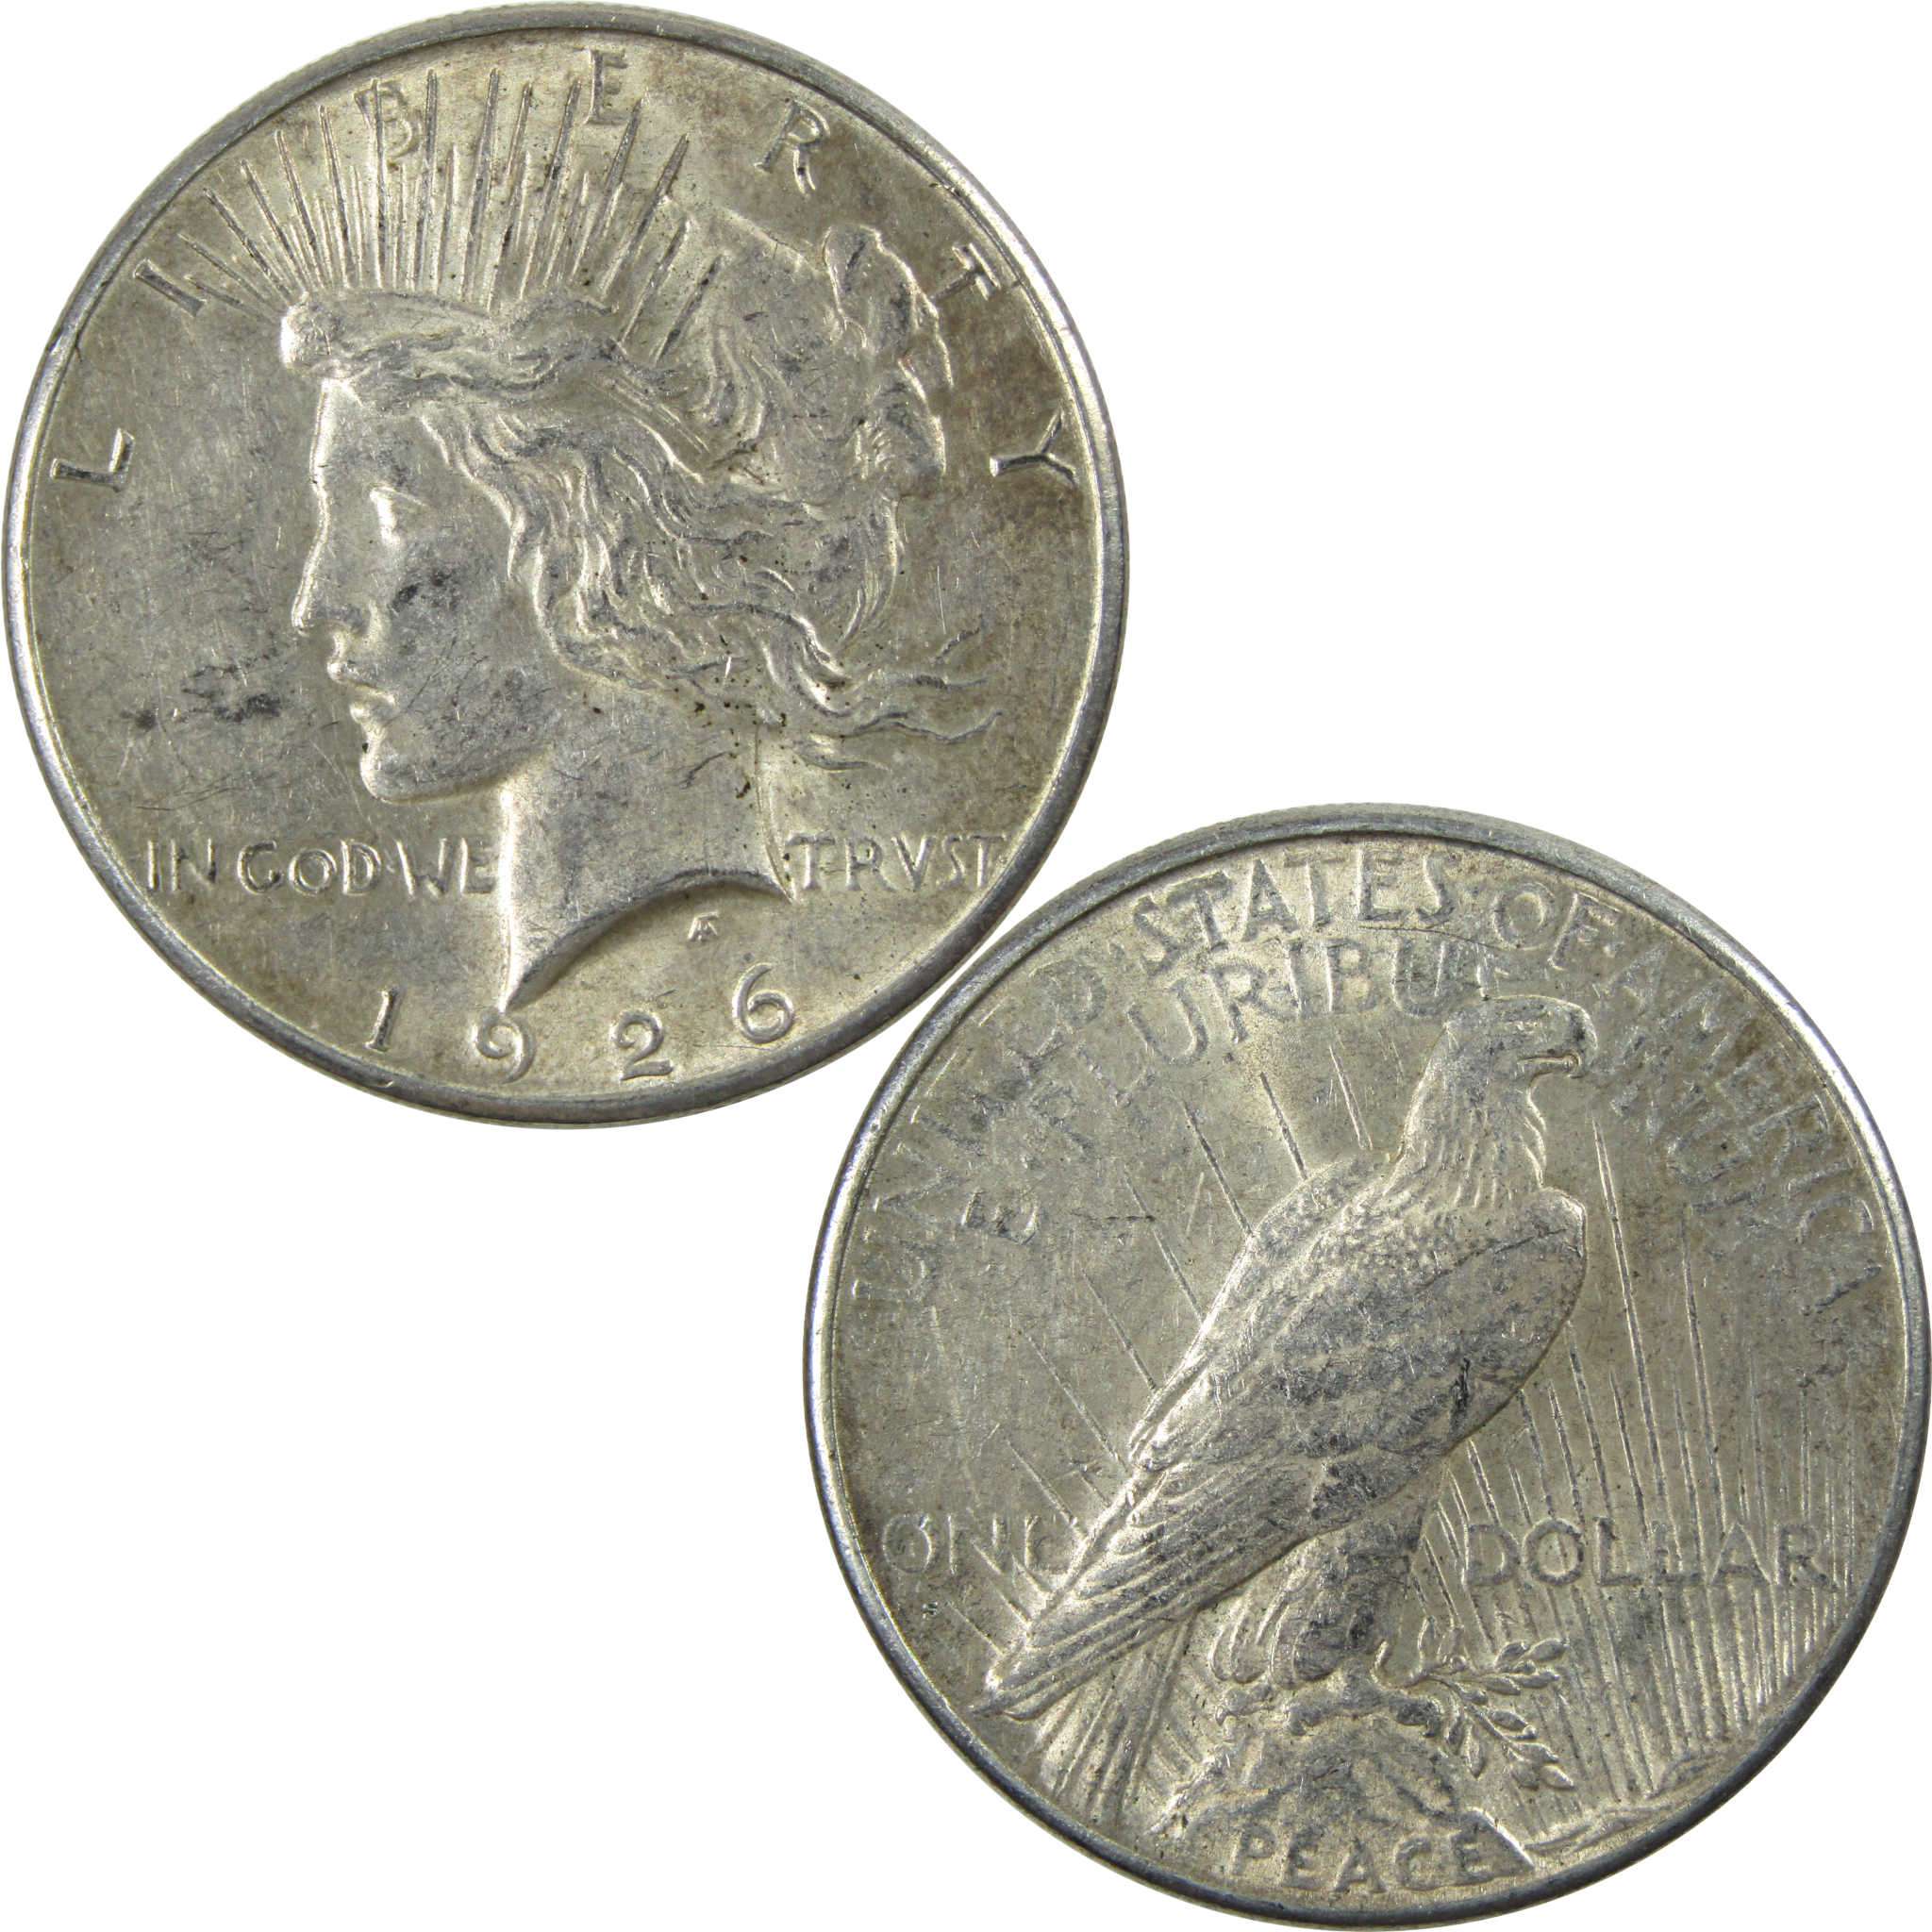 1926 S Peace Dollar XF EF Extremely Fine Silver $1 Coin SKU:I13752